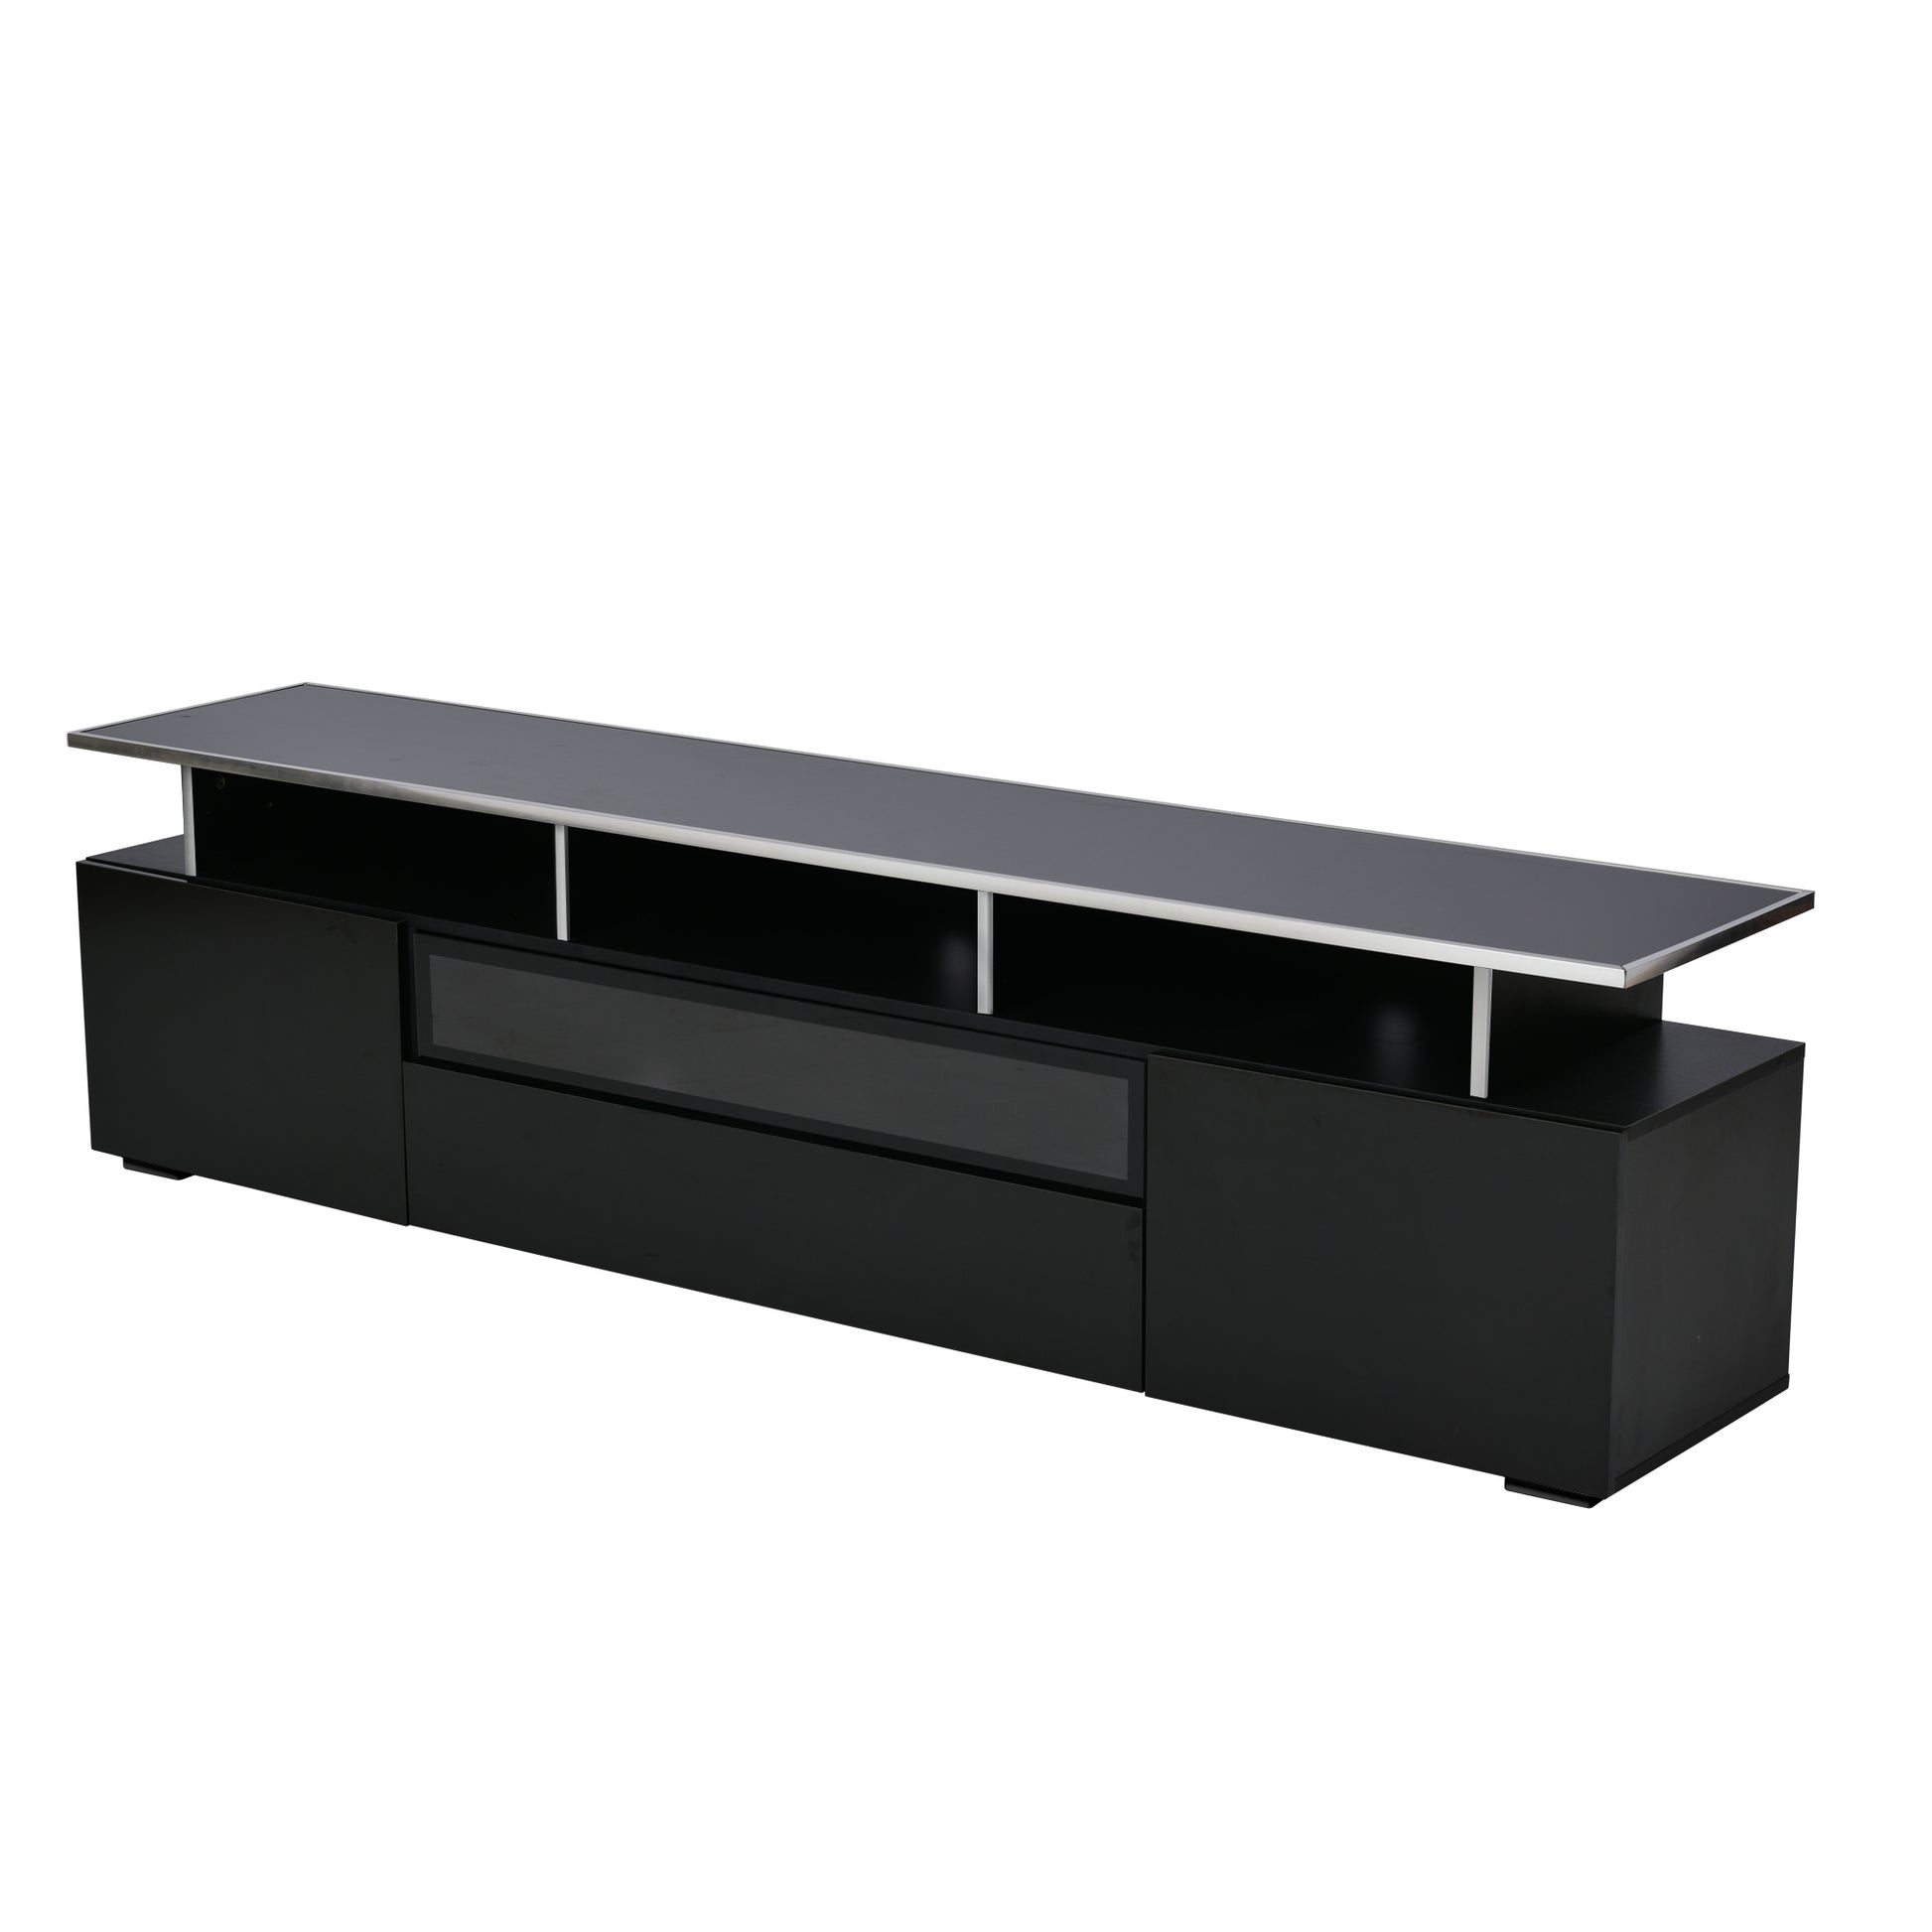 Modern Tv Stand With Push To Open Doors, Uv High